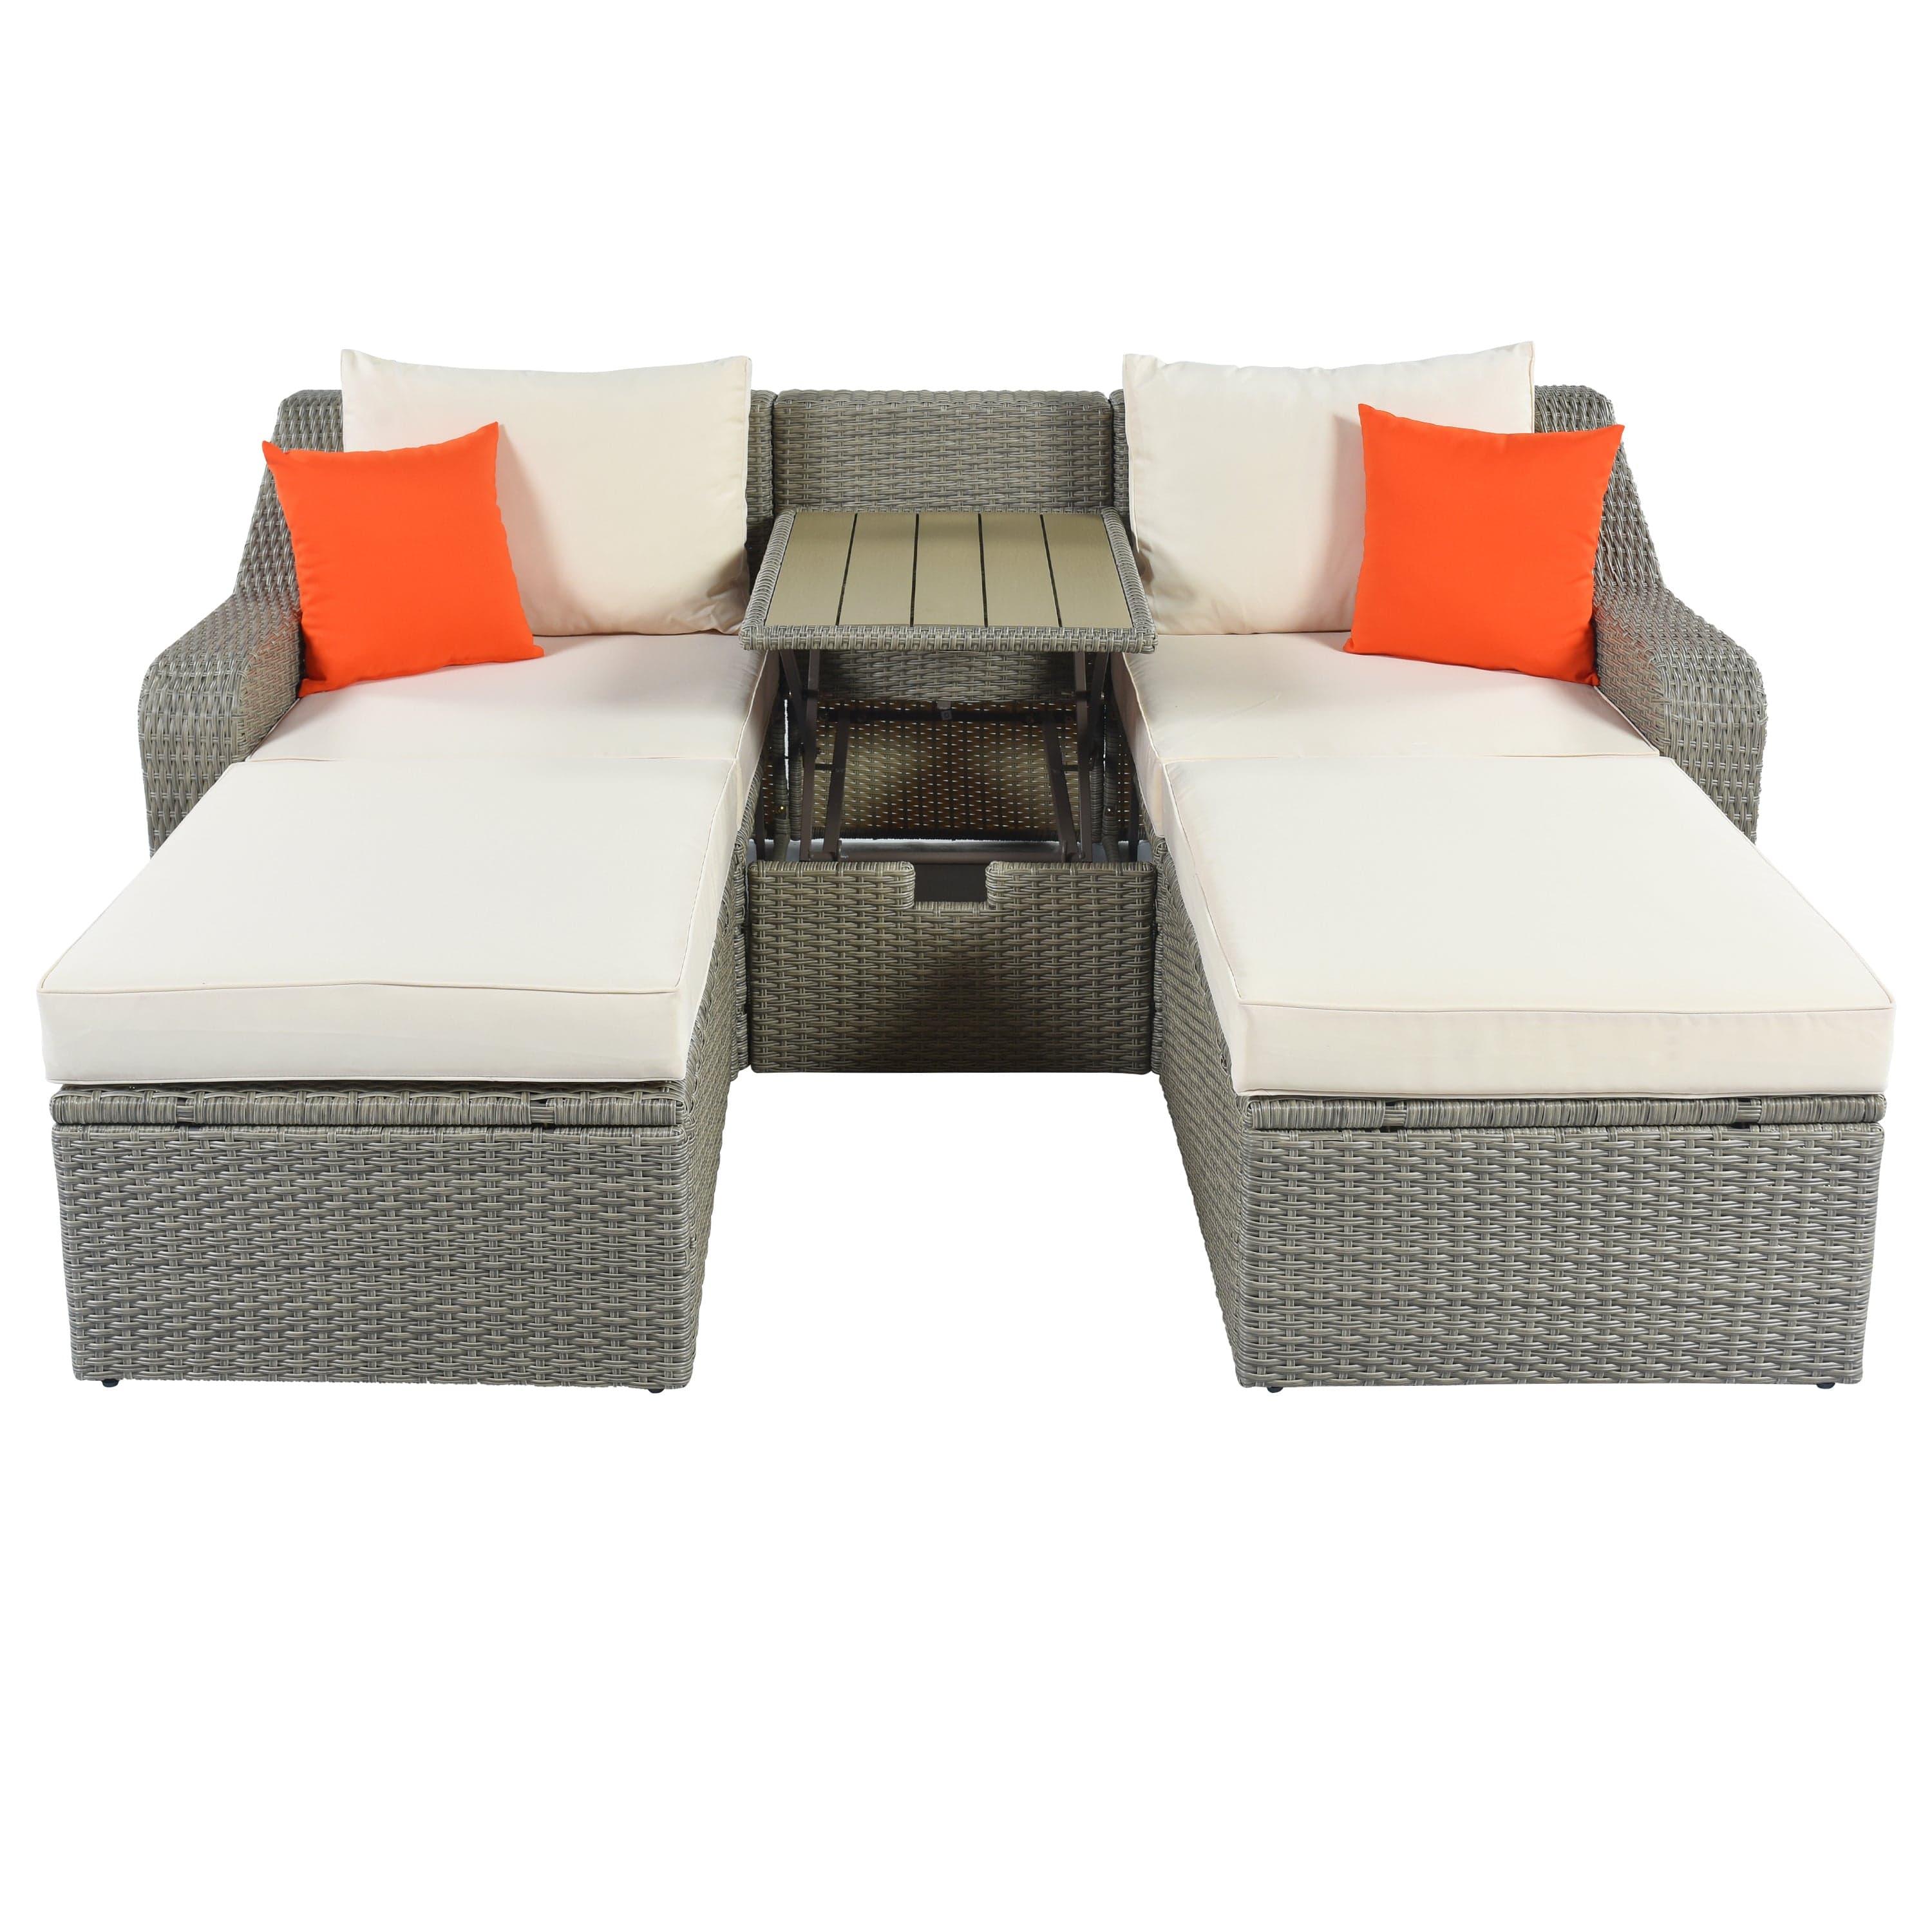 Shop U_STYLE Patio Furniture Sets, 3-Piece Patio Wicker Sofa with  Cushions, Pillows, Ottomans and Lift Top Coffee Table Mademoiselle Home Decor